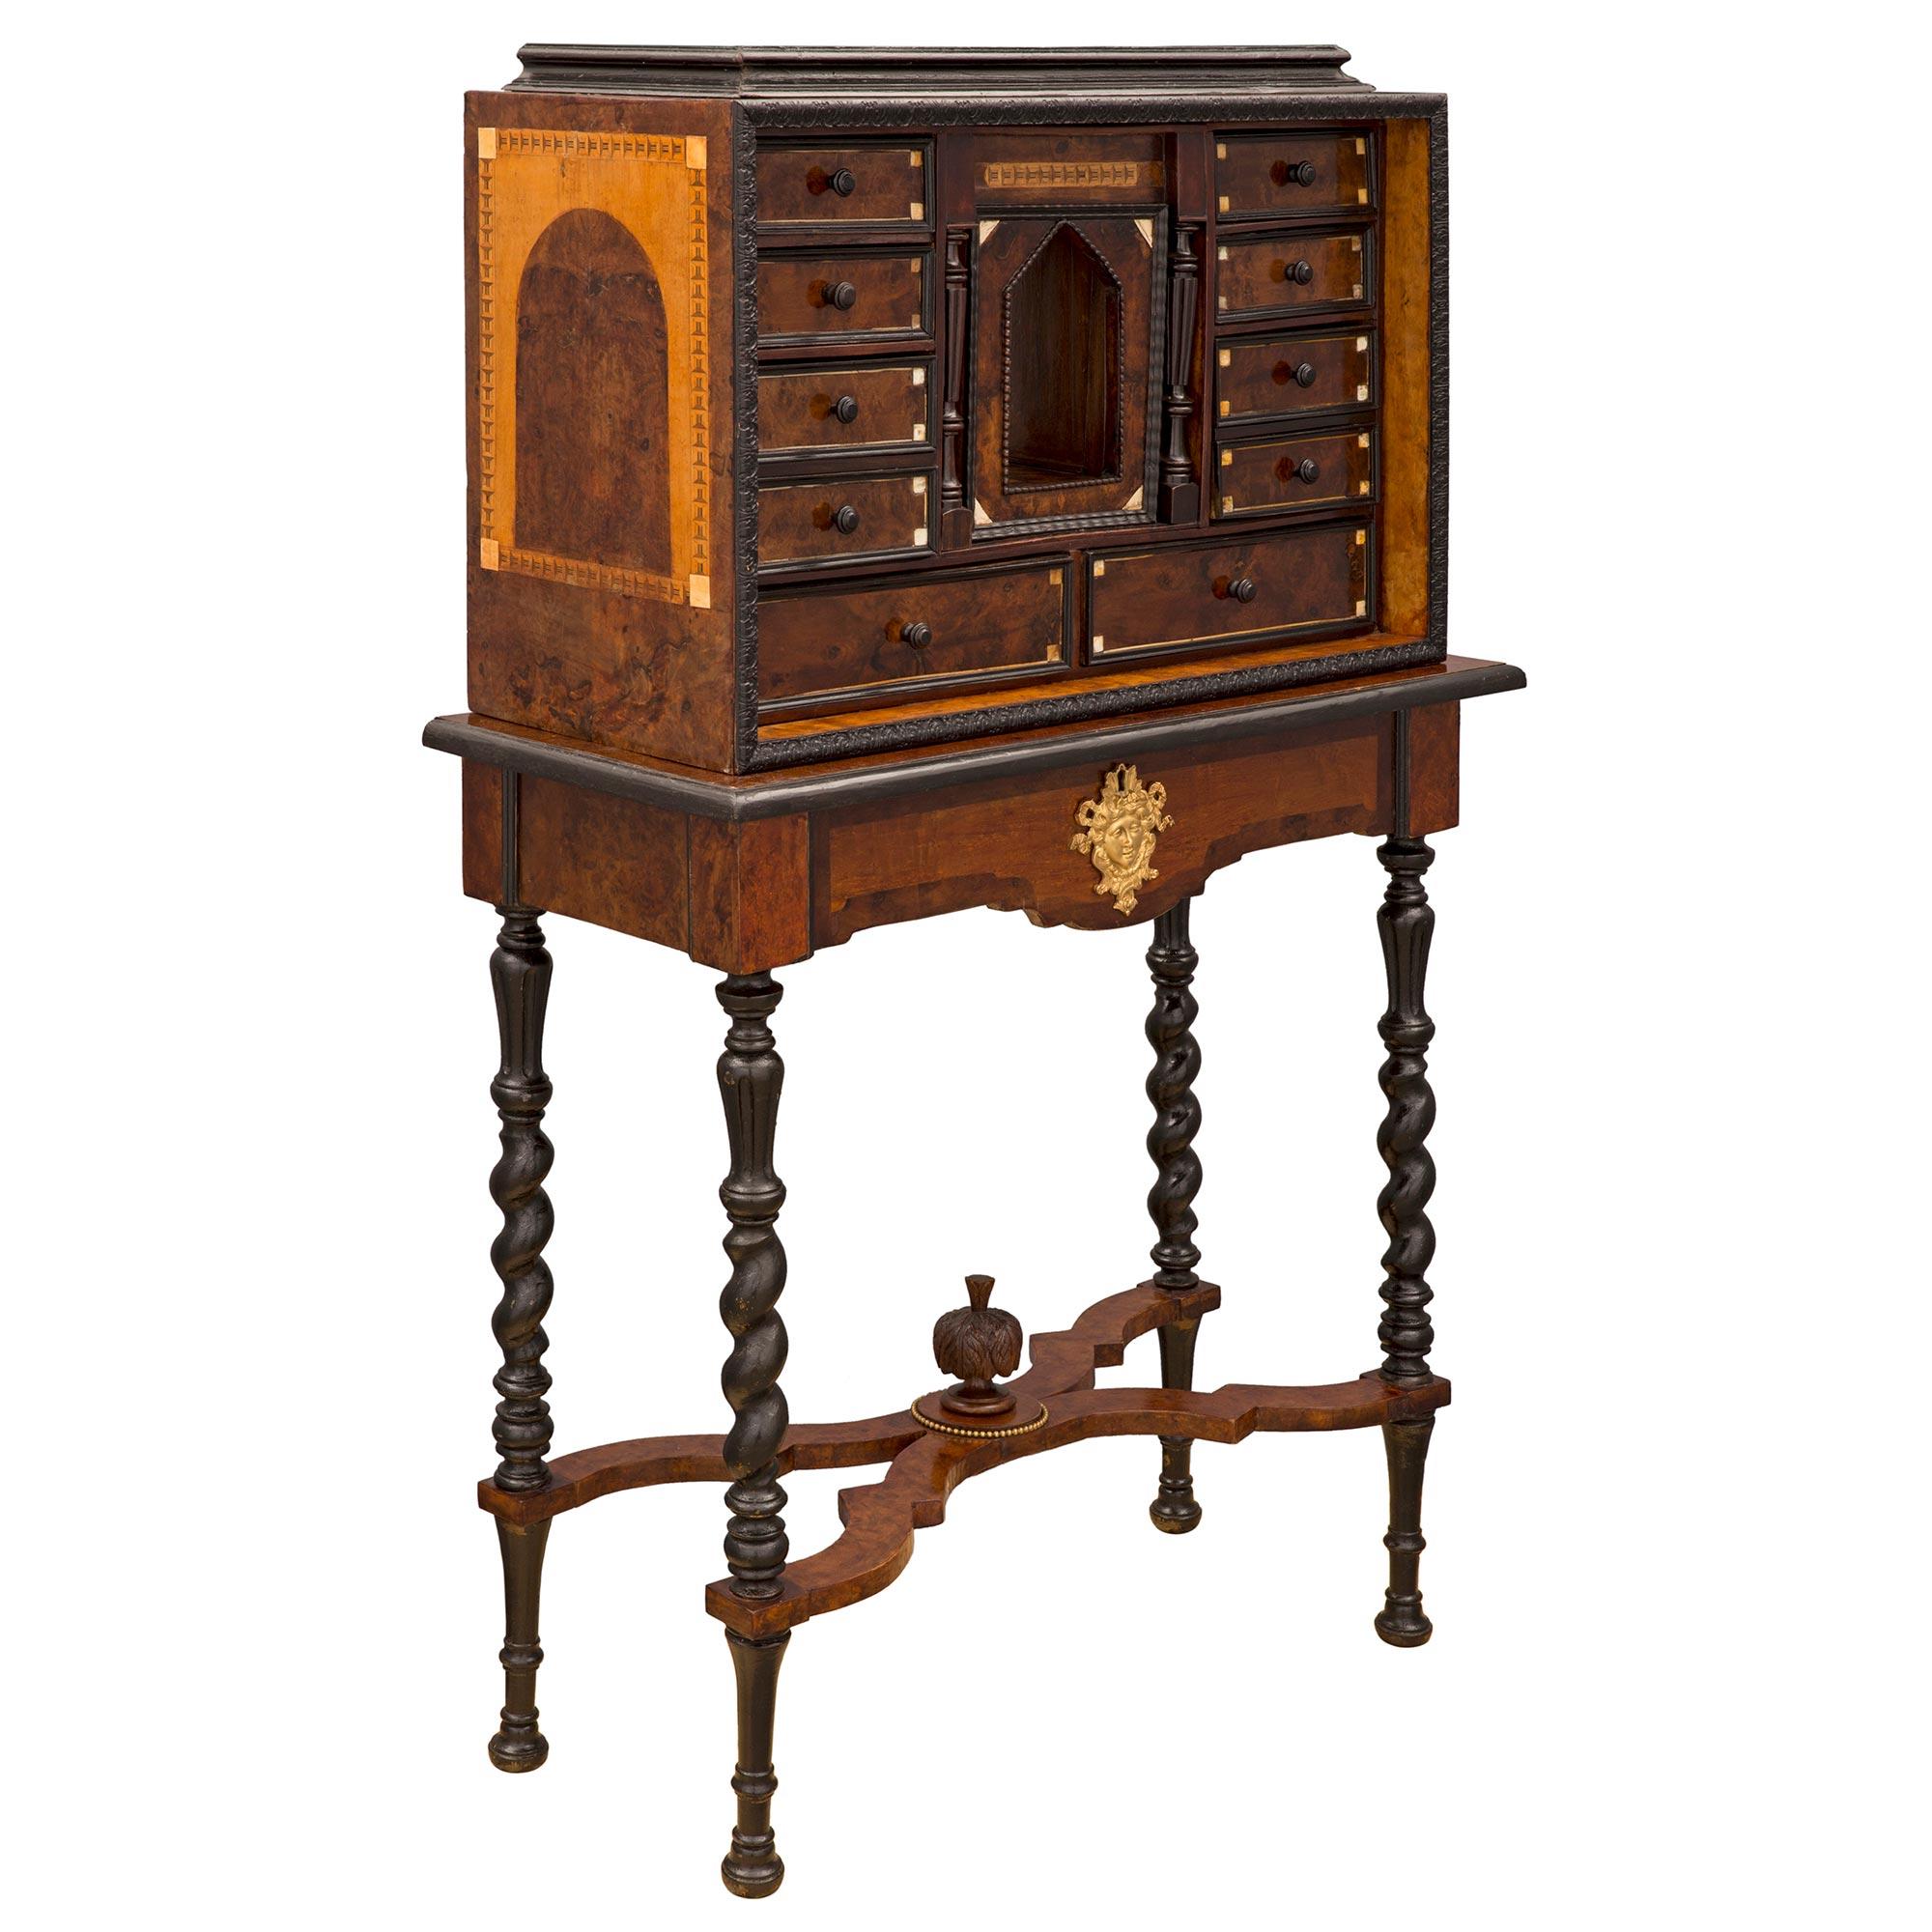 Italian Early 19th Century Baroque St. Walnut, Satinwood, Bone, and Ormolu Cabin In Good Condition For Sale In West Palm Beach, FL